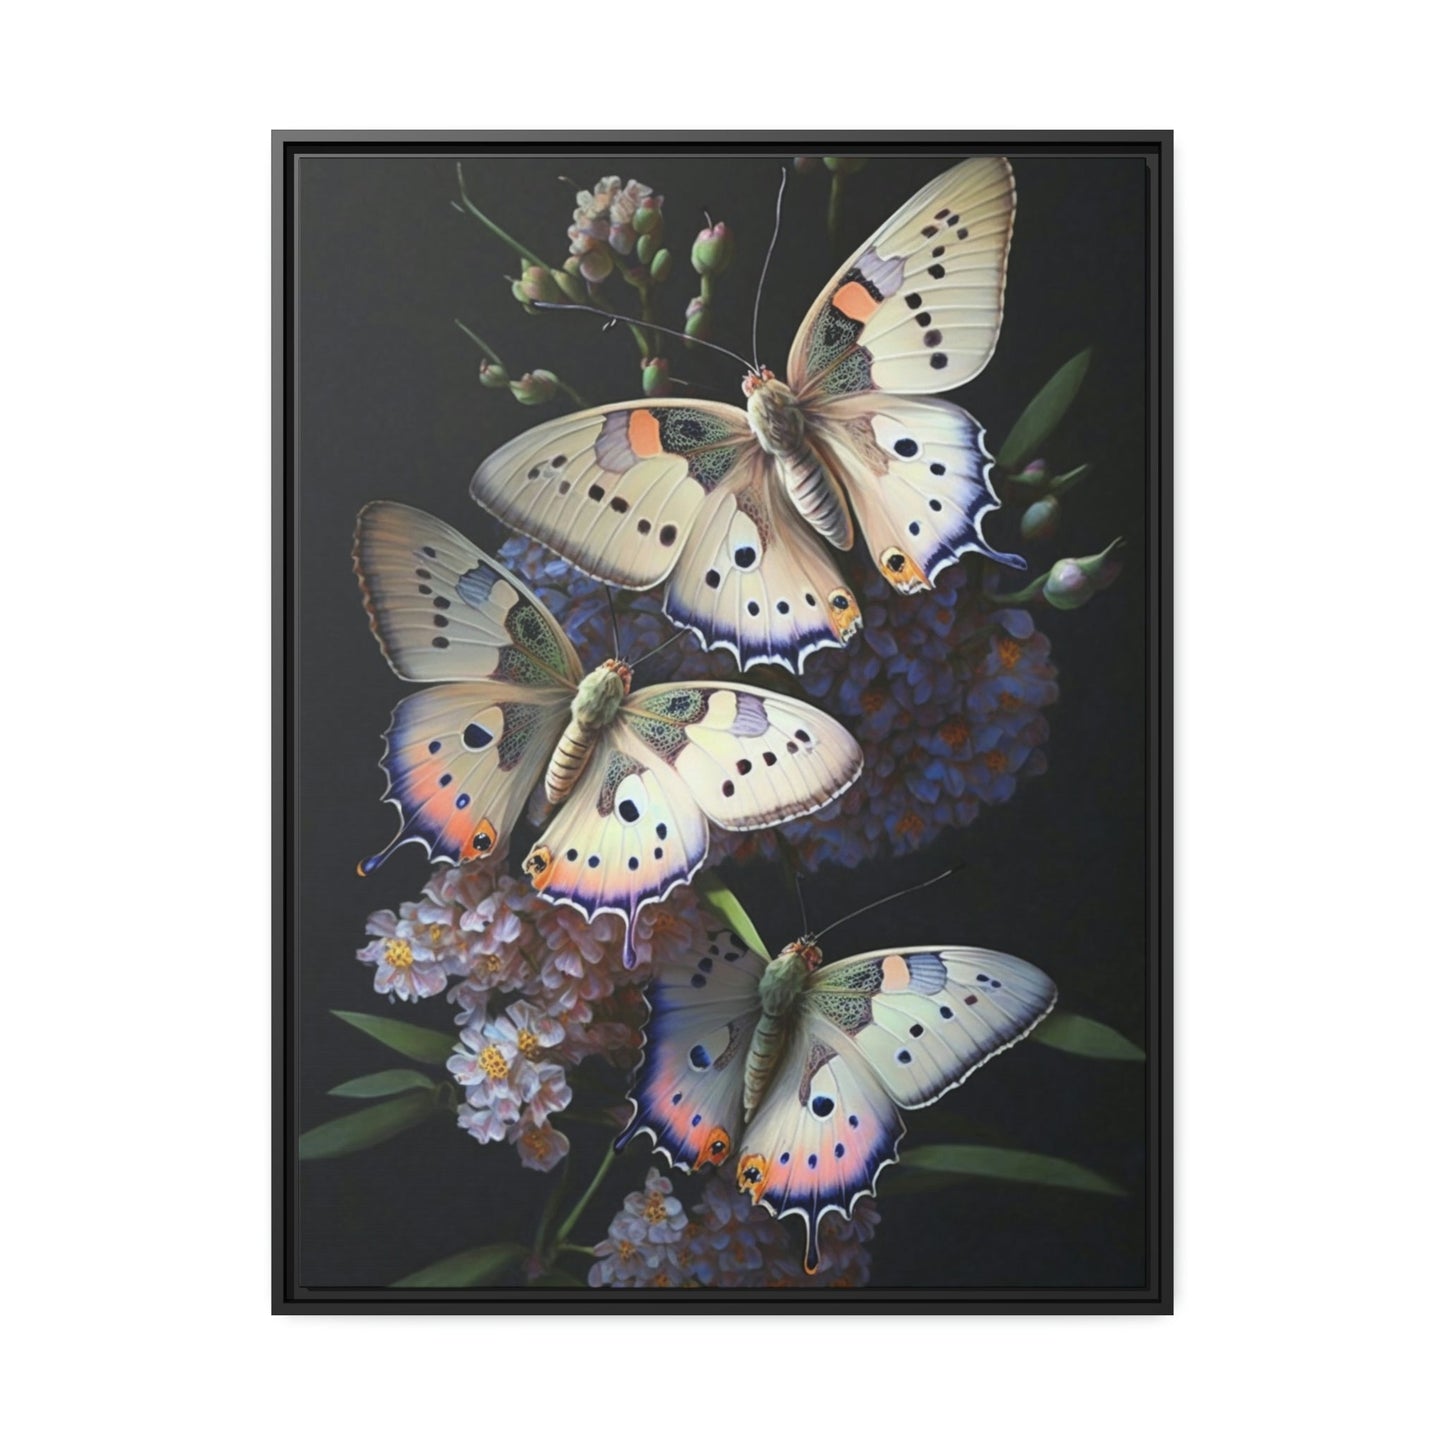 Butterflies on a Summer Day: Canvas Wall Art Print of Insects in Warm Sunlight